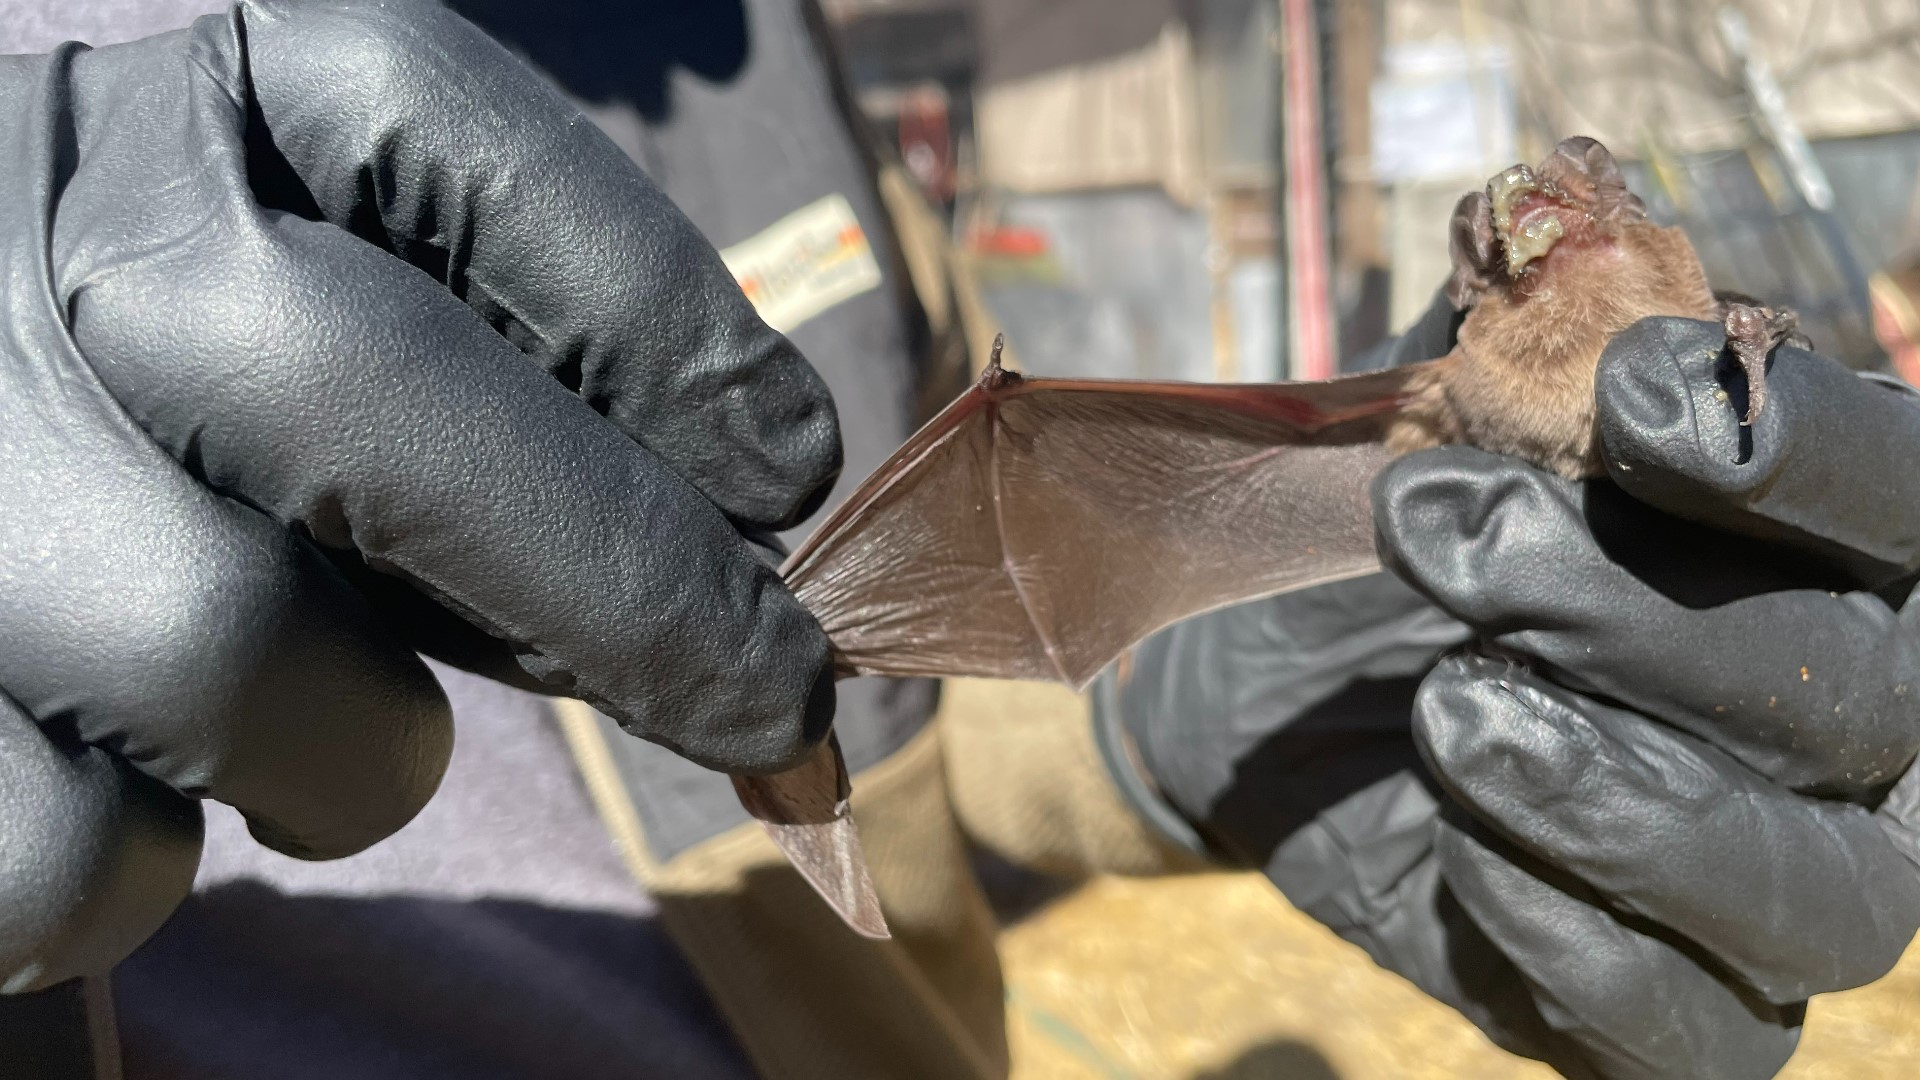 During a freeze in January, nearly 1,000 bats died. KVUE visited a local bat refuge to get an up-close look at what's being done to help the animals.